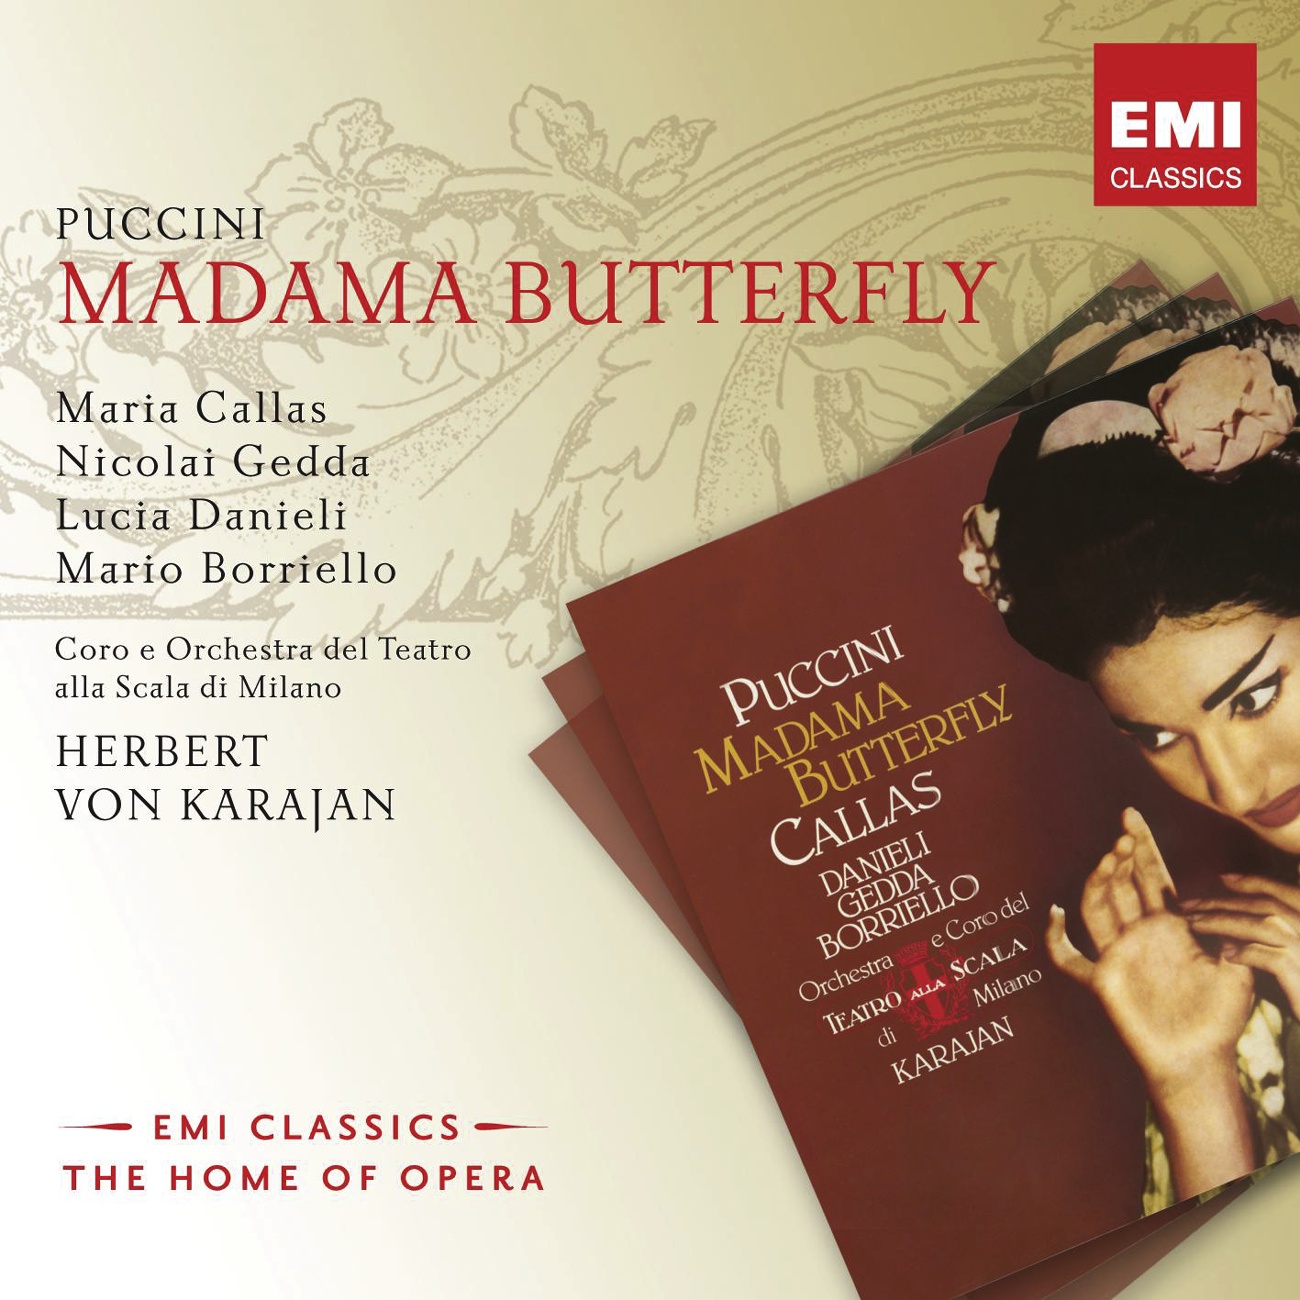 Madama Butterfly (2008 Remastered Version), Act II, First Part: Non lo sapete insomma